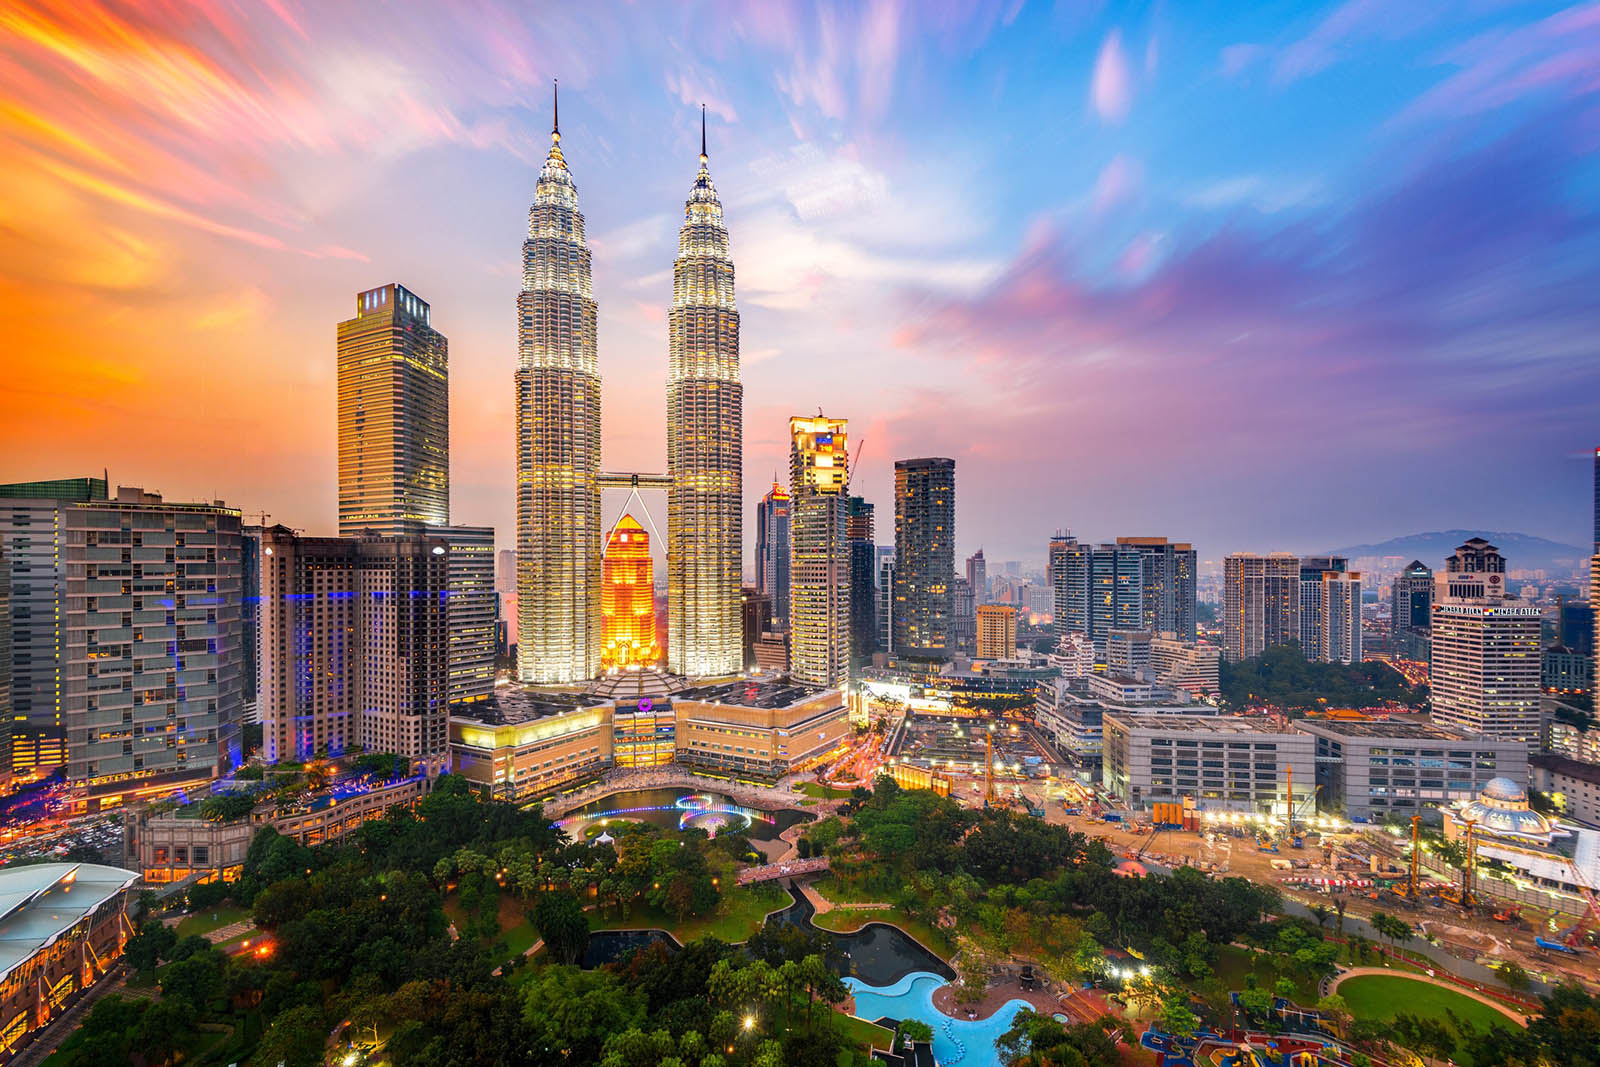 Unfortunately, Most People Will Struggle to Locate These Countries — Can You Get 17/25? Petronas Twin Towers, Kuala Lumpur, Malaysia